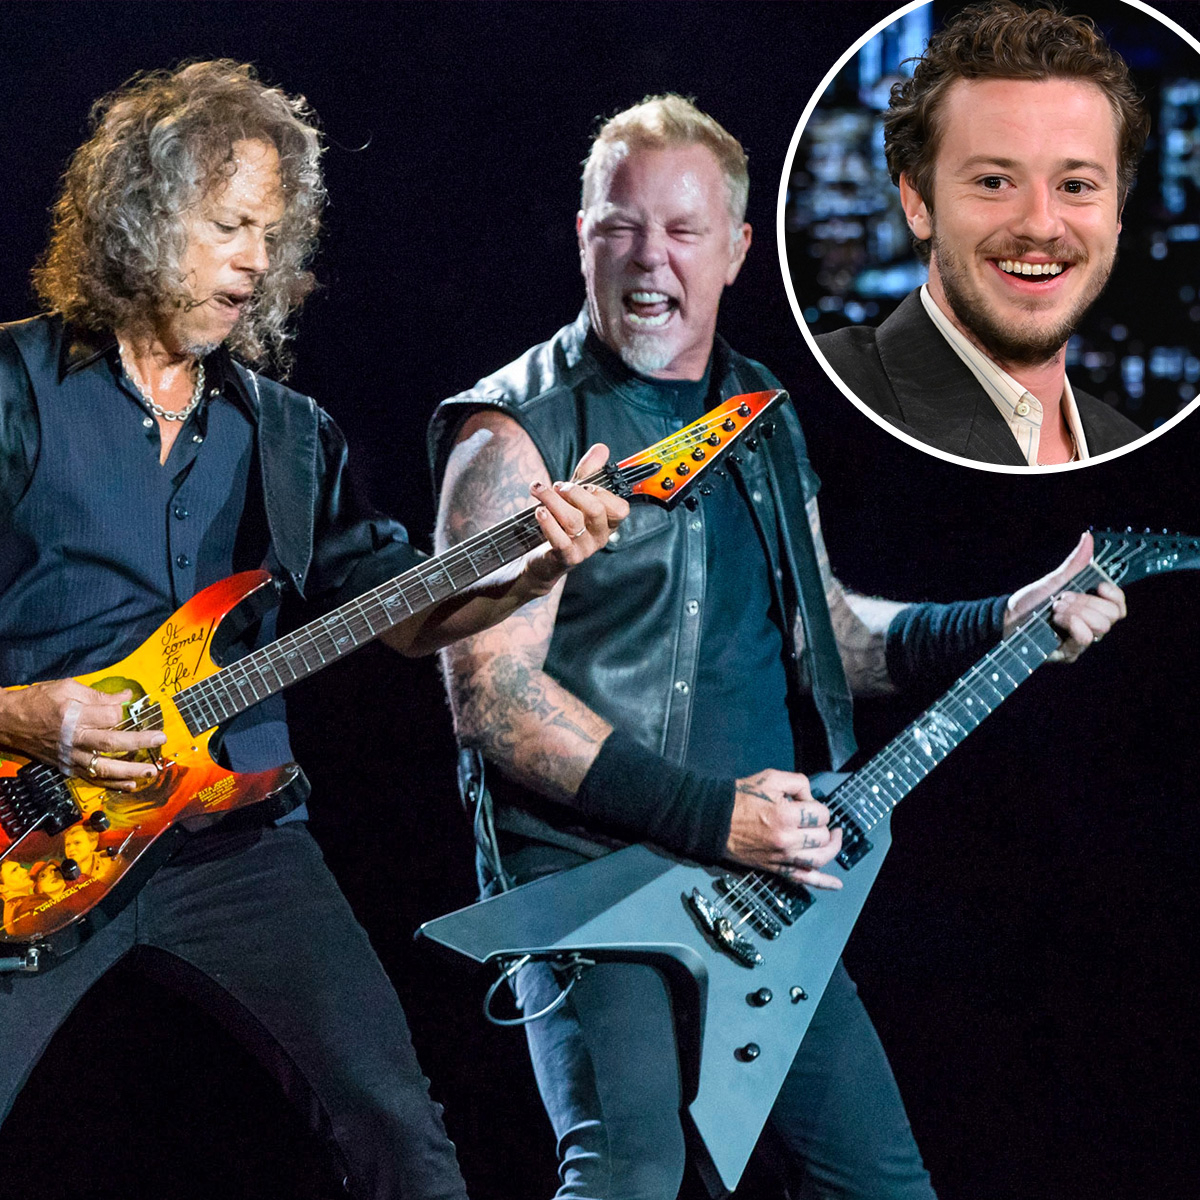 See Stranger Things’ Joseph Quinn Jam Out With Metallica